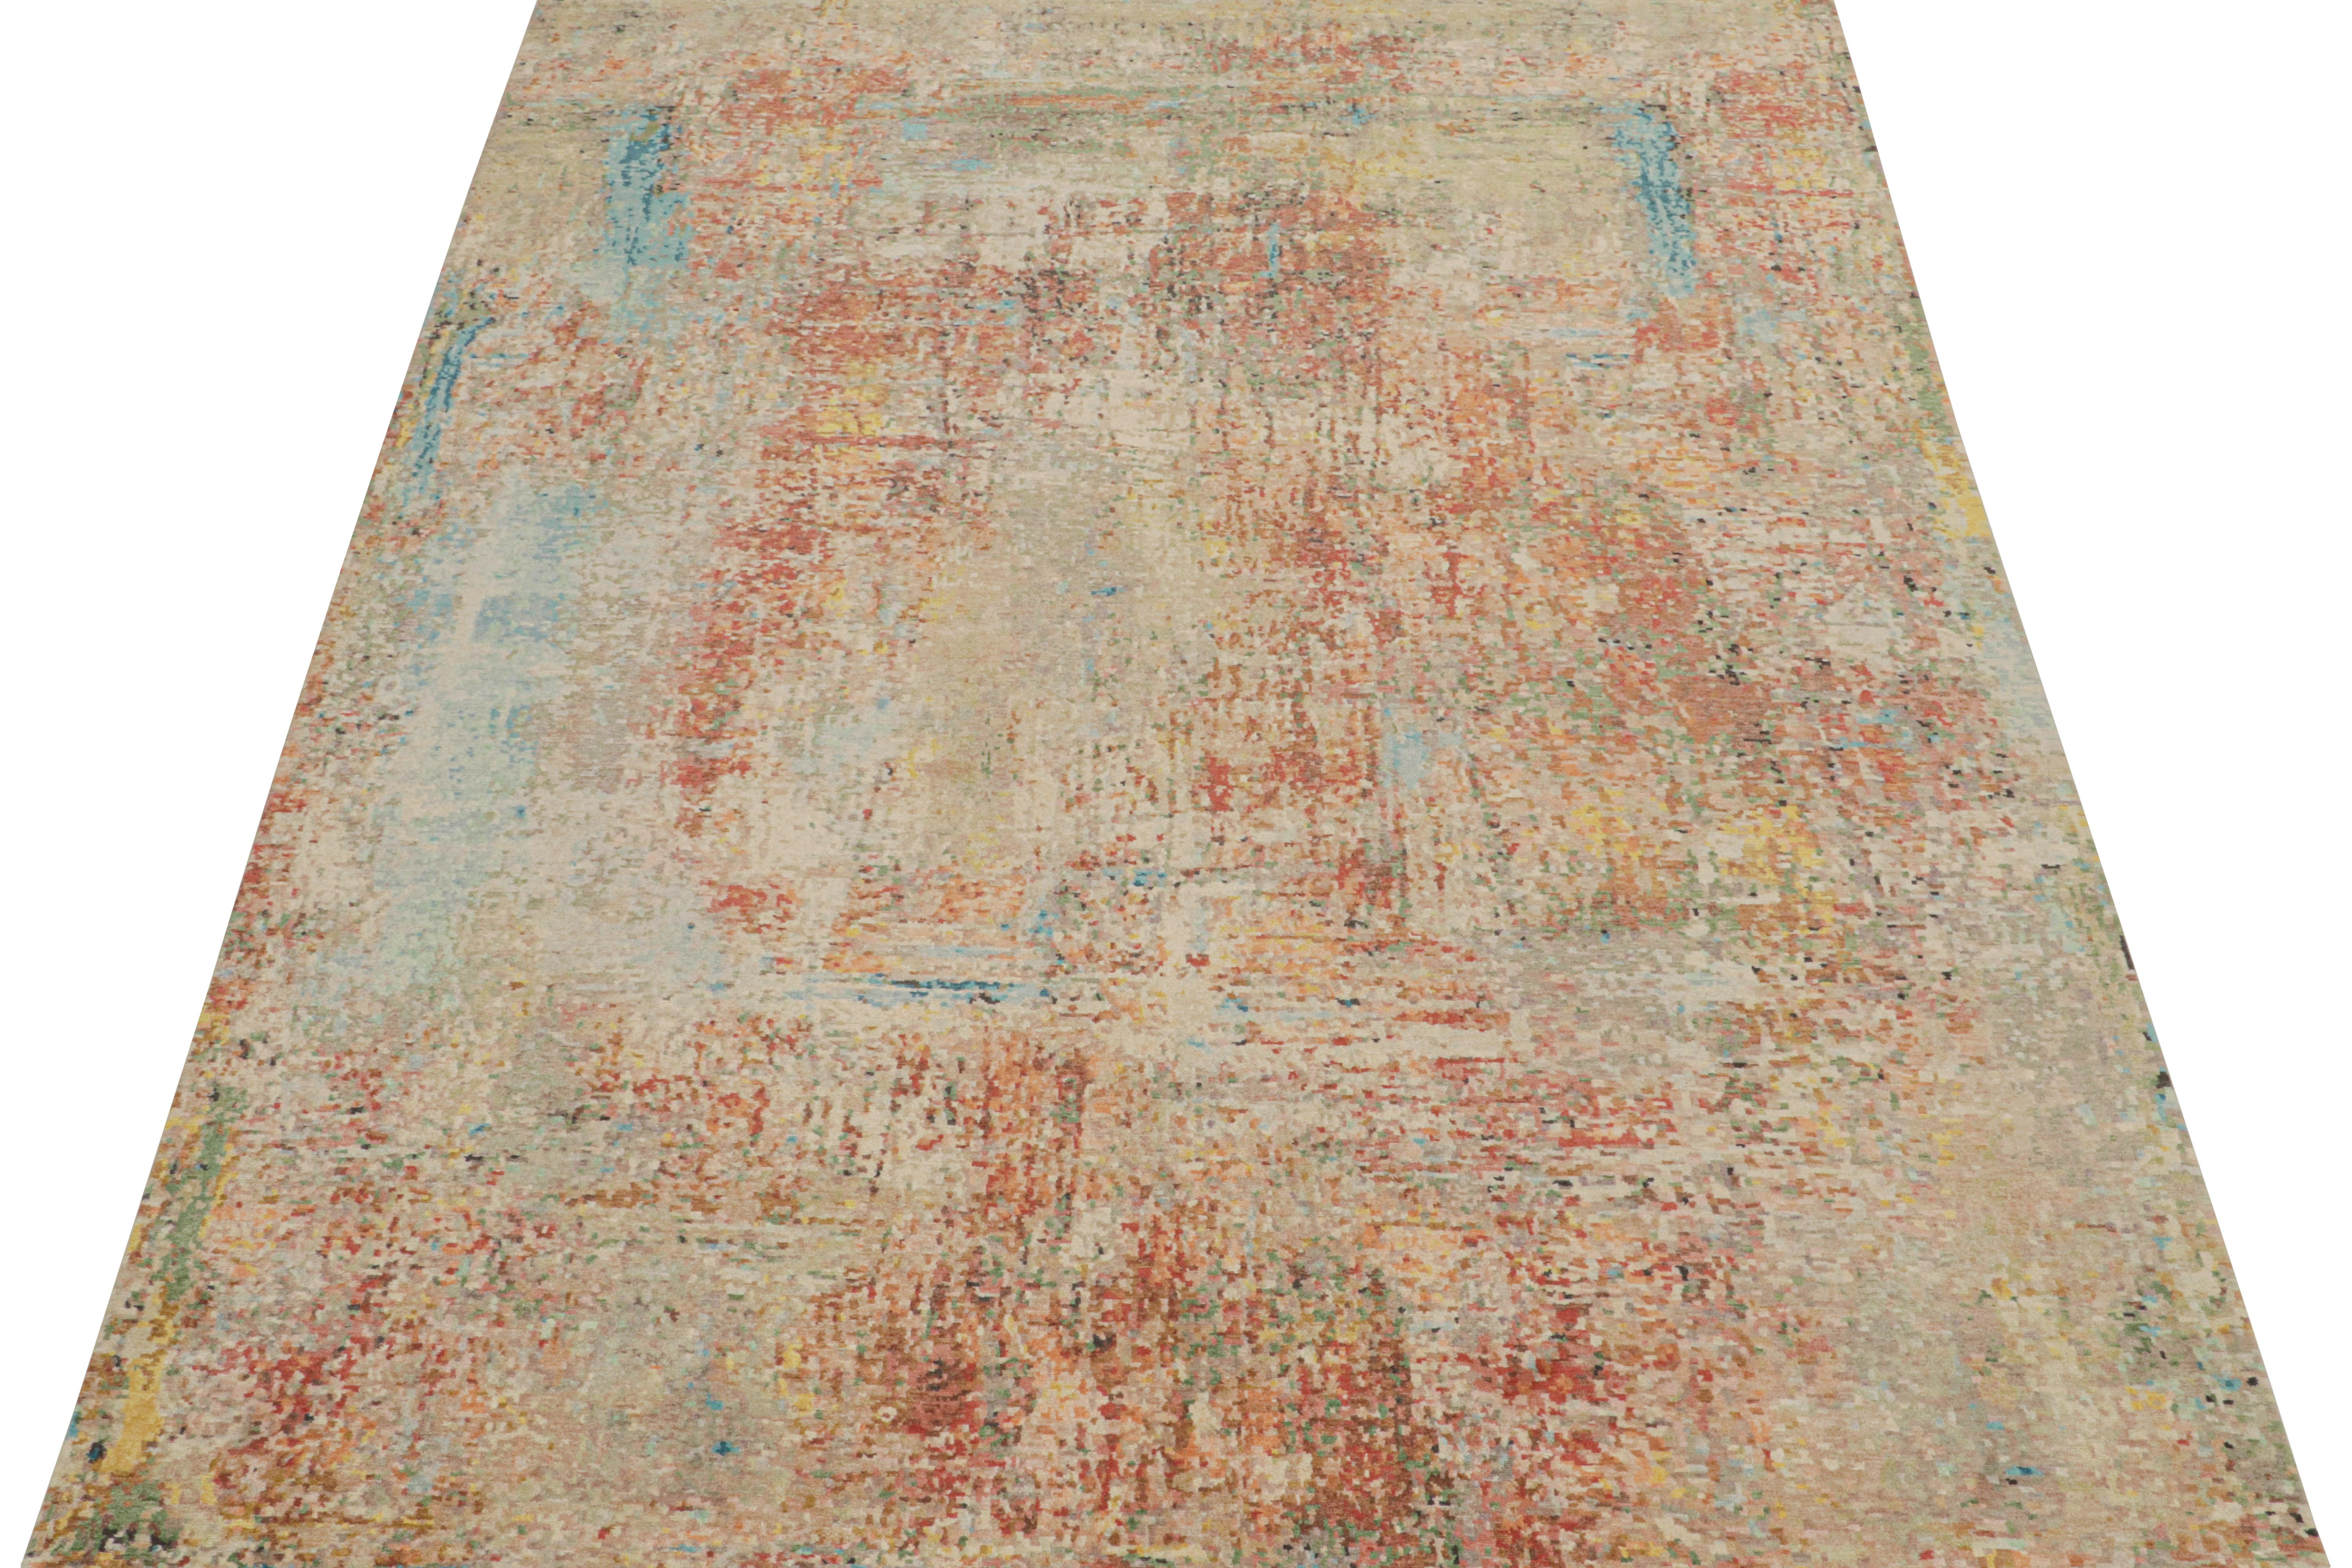 This 9x12 abstract rug is a bold new addition to Rug & Kilim’s Modern rug collection. Hand-knotted in wool and silk, its design is a take on expressionist sensibilities in the most exceptional high-end quality.

Further on the Design:

The